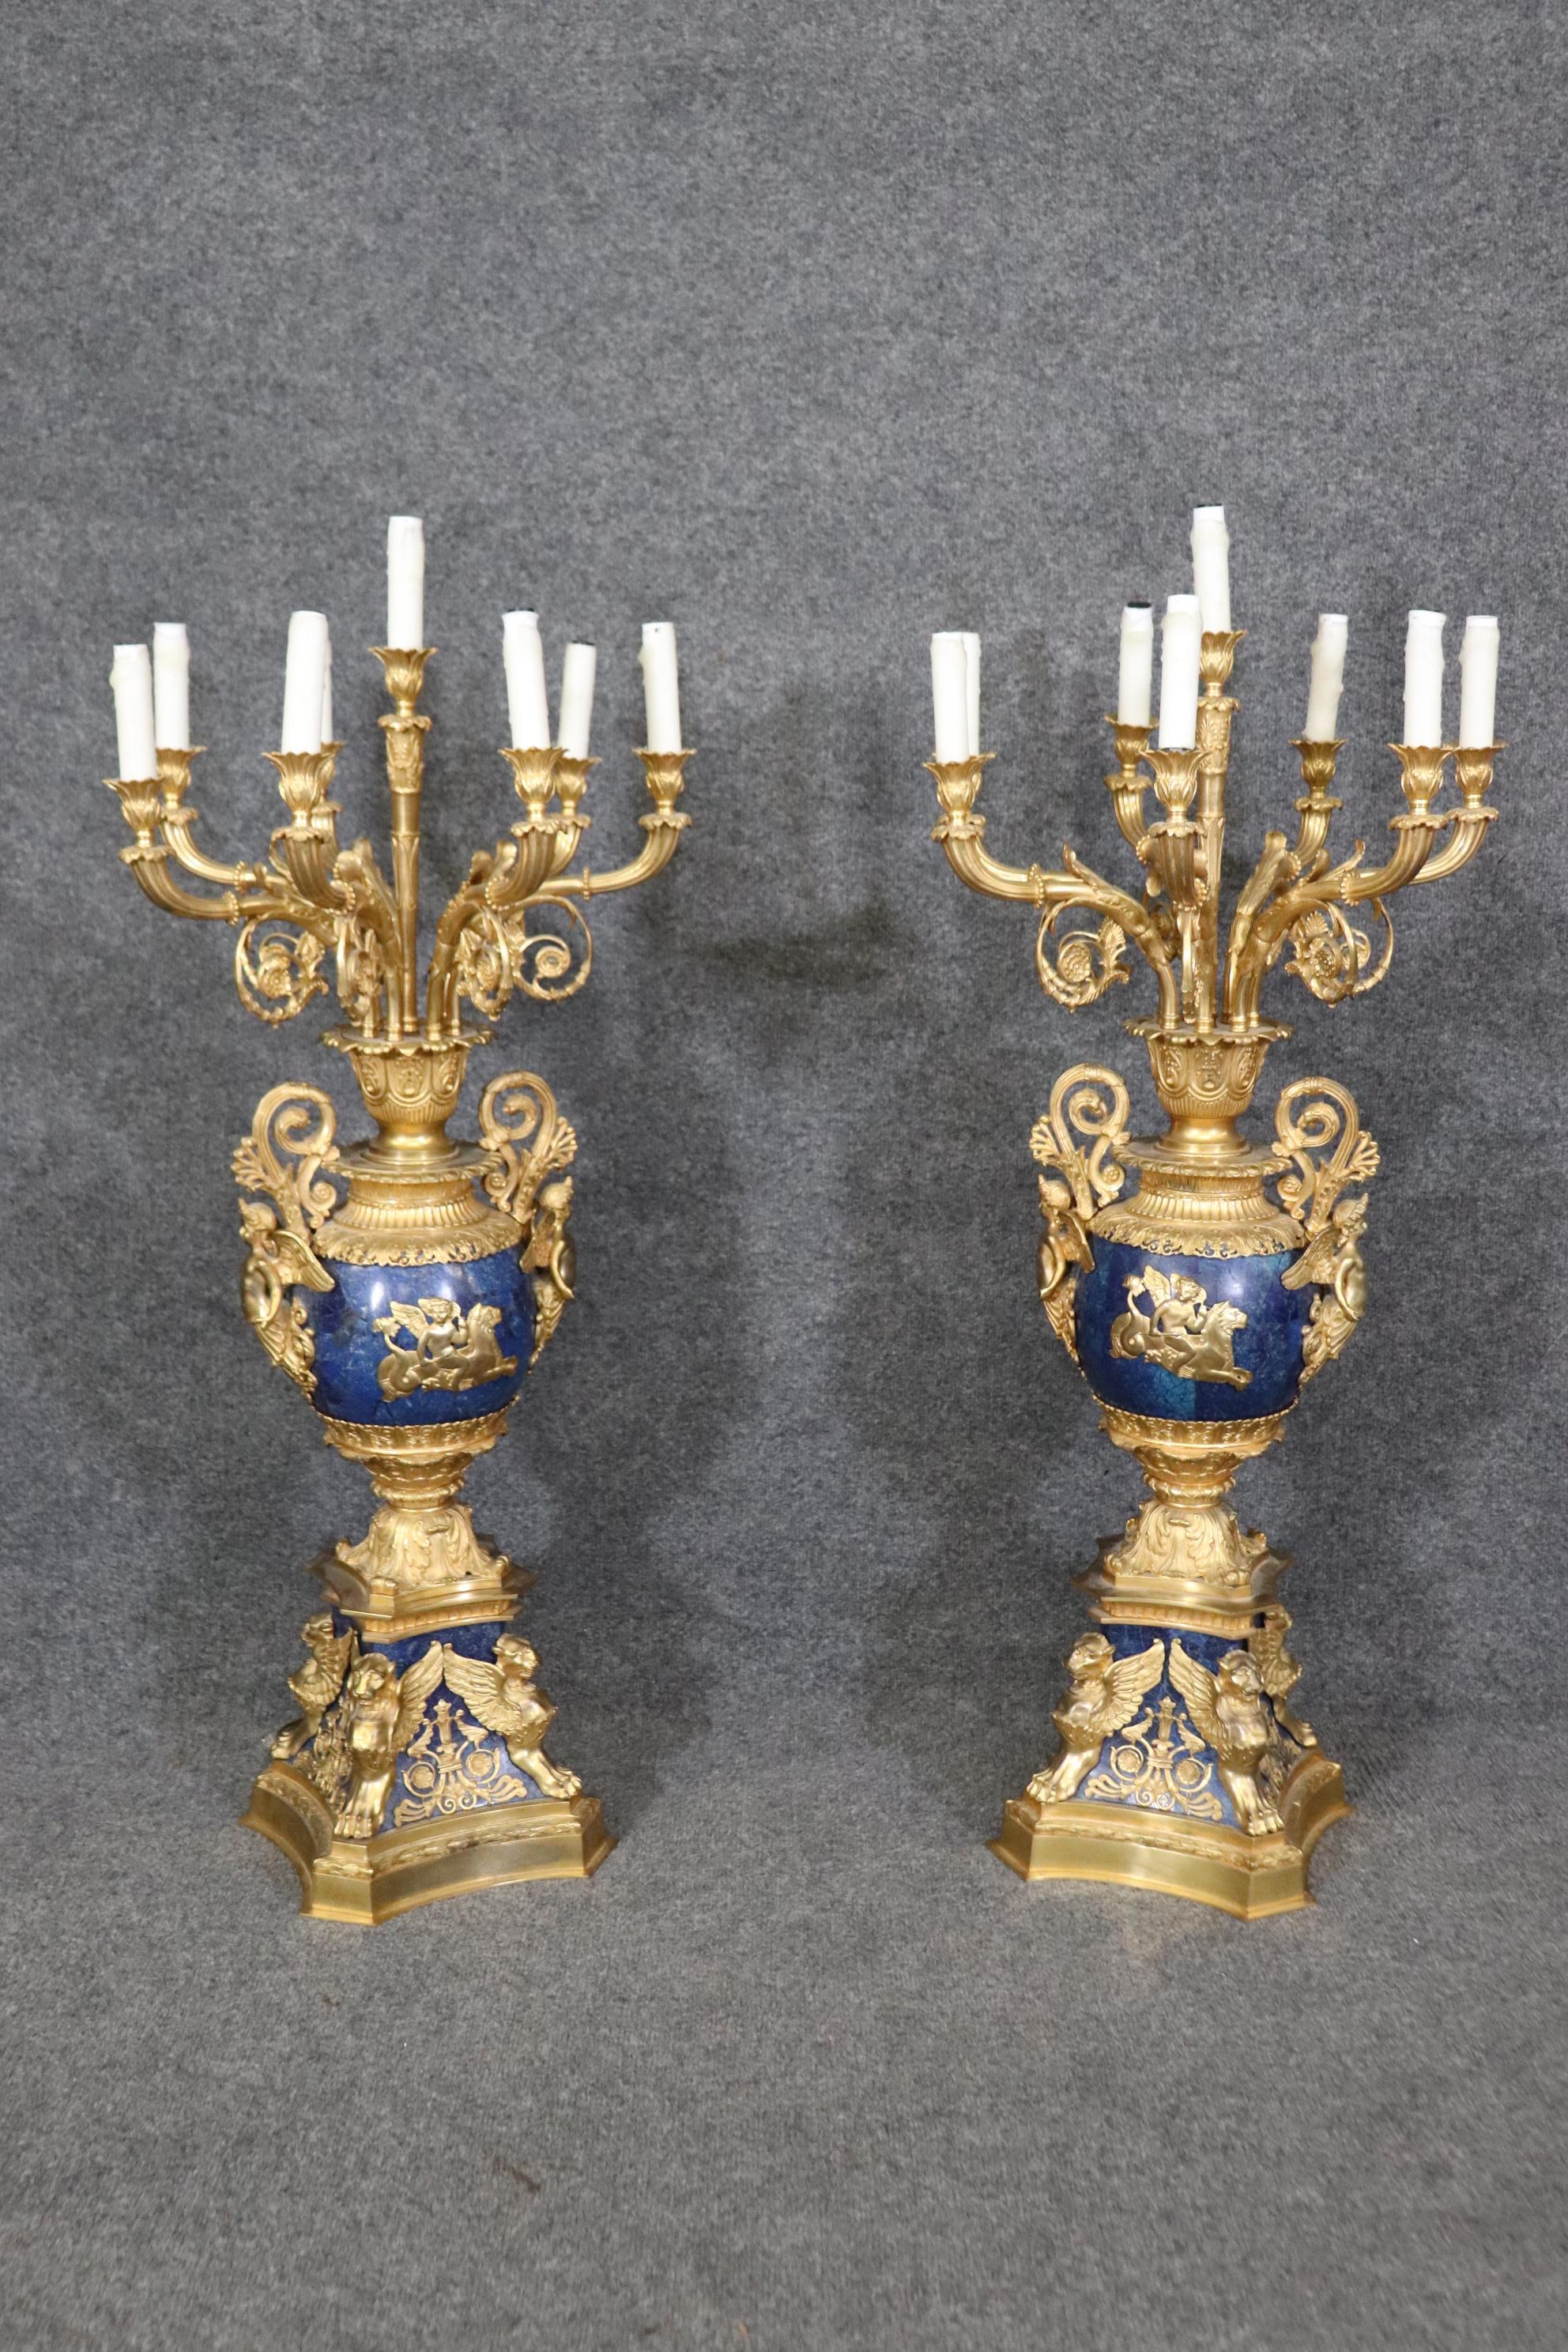 Late 19th Century French Belle Epoque Dore' Bronze and Lapis Lazuli Candelabra For Sale 5